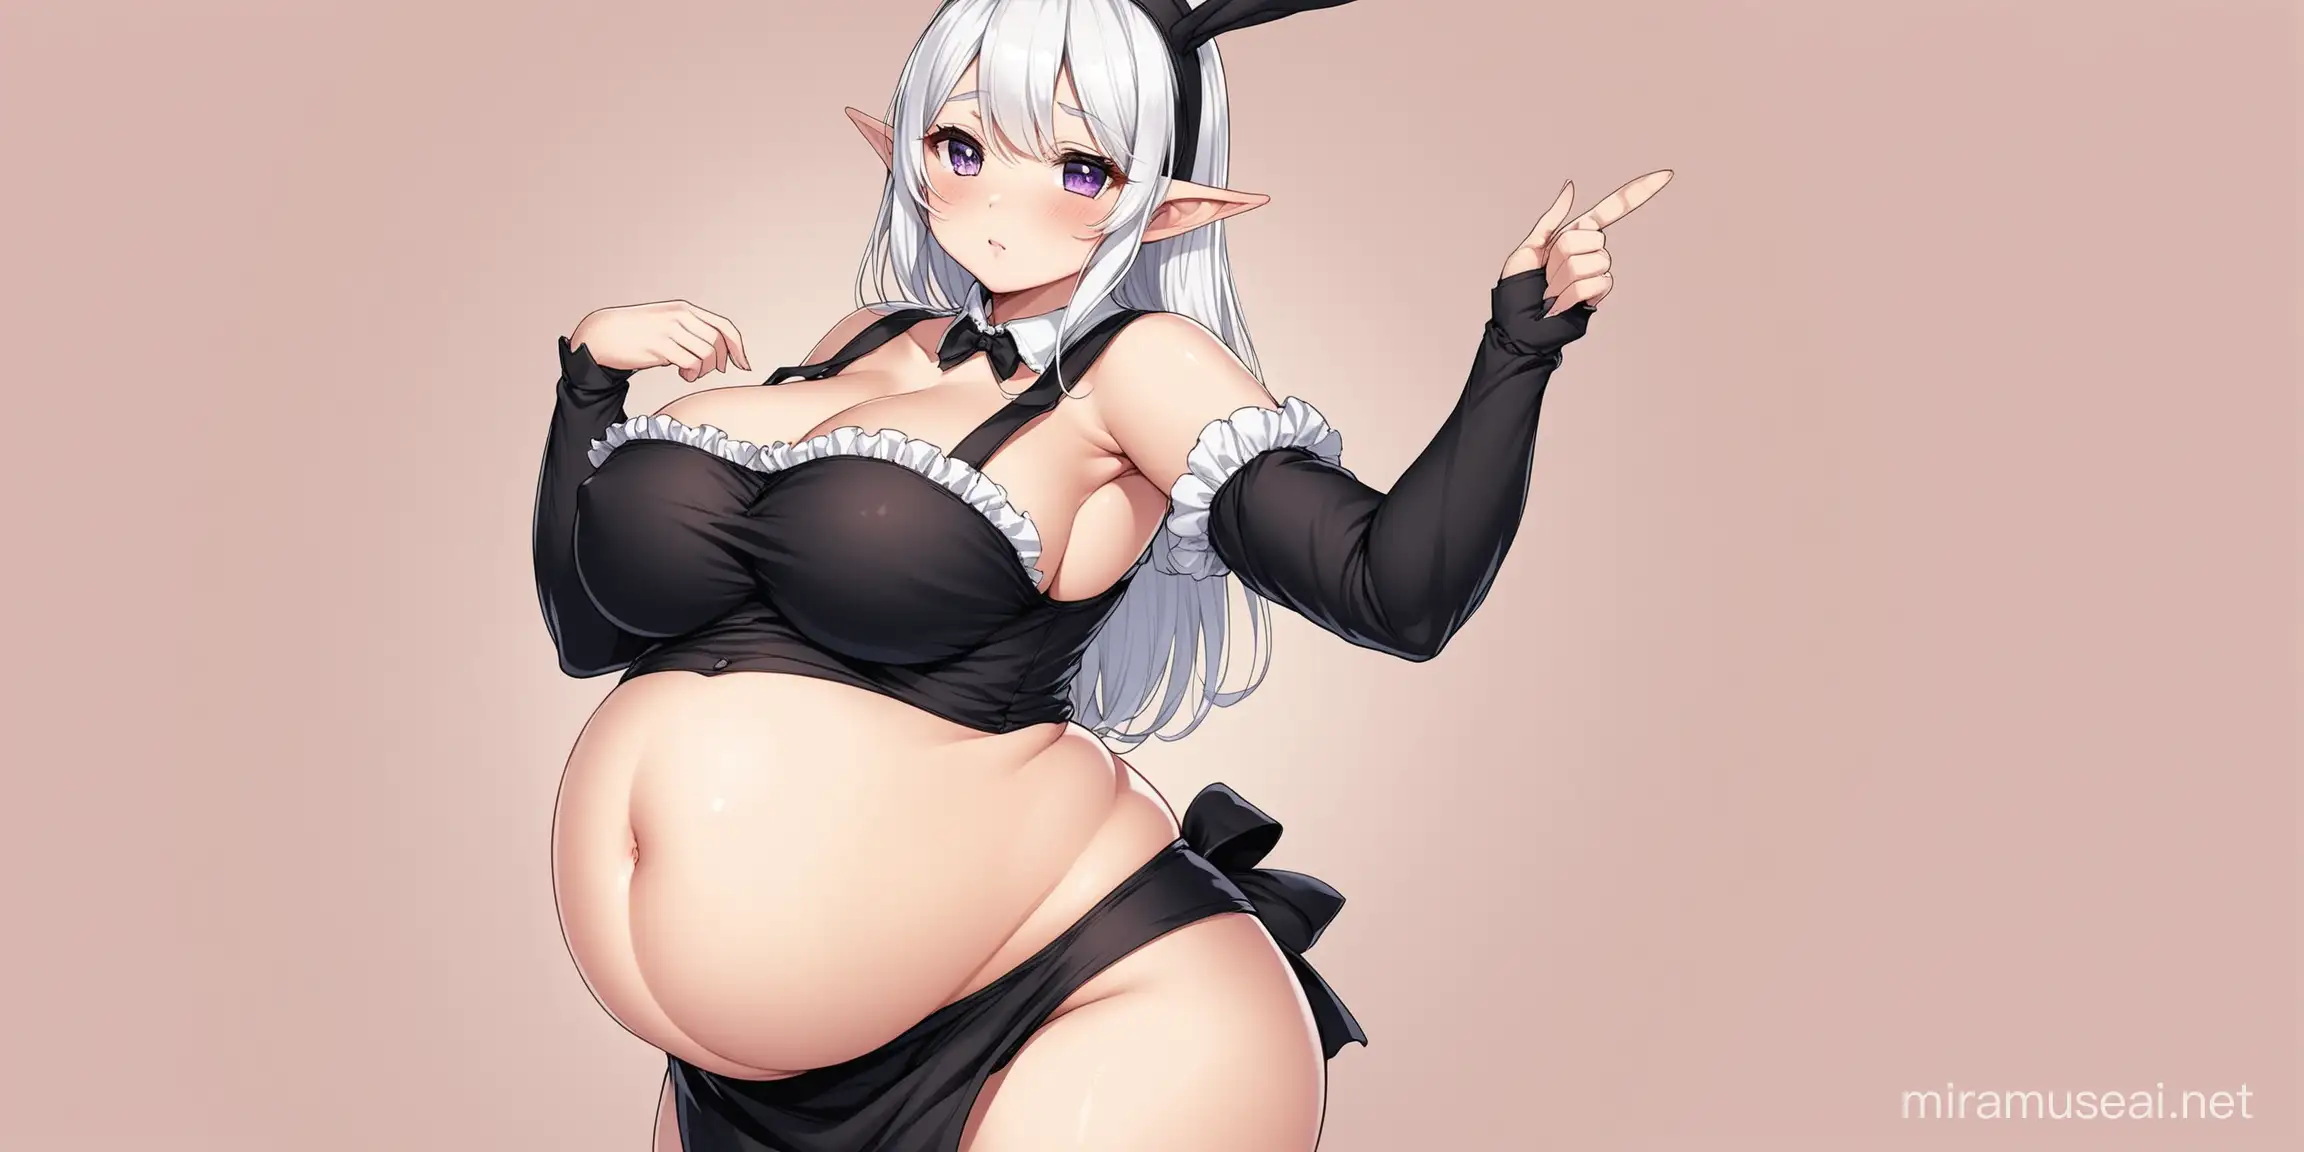 With a gentle hand resting on her swollen belly, the beautiful elf maid stands before her master with the intent of inquiring the changes occurring within her body, oblivious to her pregnancy. She’s perfectly round and ready-to-pop. Her traditional black maid uniform no longer fits, it simply covers the upper portion of her swollen middle leaving the rest of her huge, swollen belly bared beneath. Her navel has popped out and become an outie, only accentuating just how far along she is. Despite all this, she remains blank faced, oblivious as to the true nature of her condition. She possesses white hair which covers one of her purple eyes, pointed ears, and black antennae atop her head resembling pointed rabbit ears.